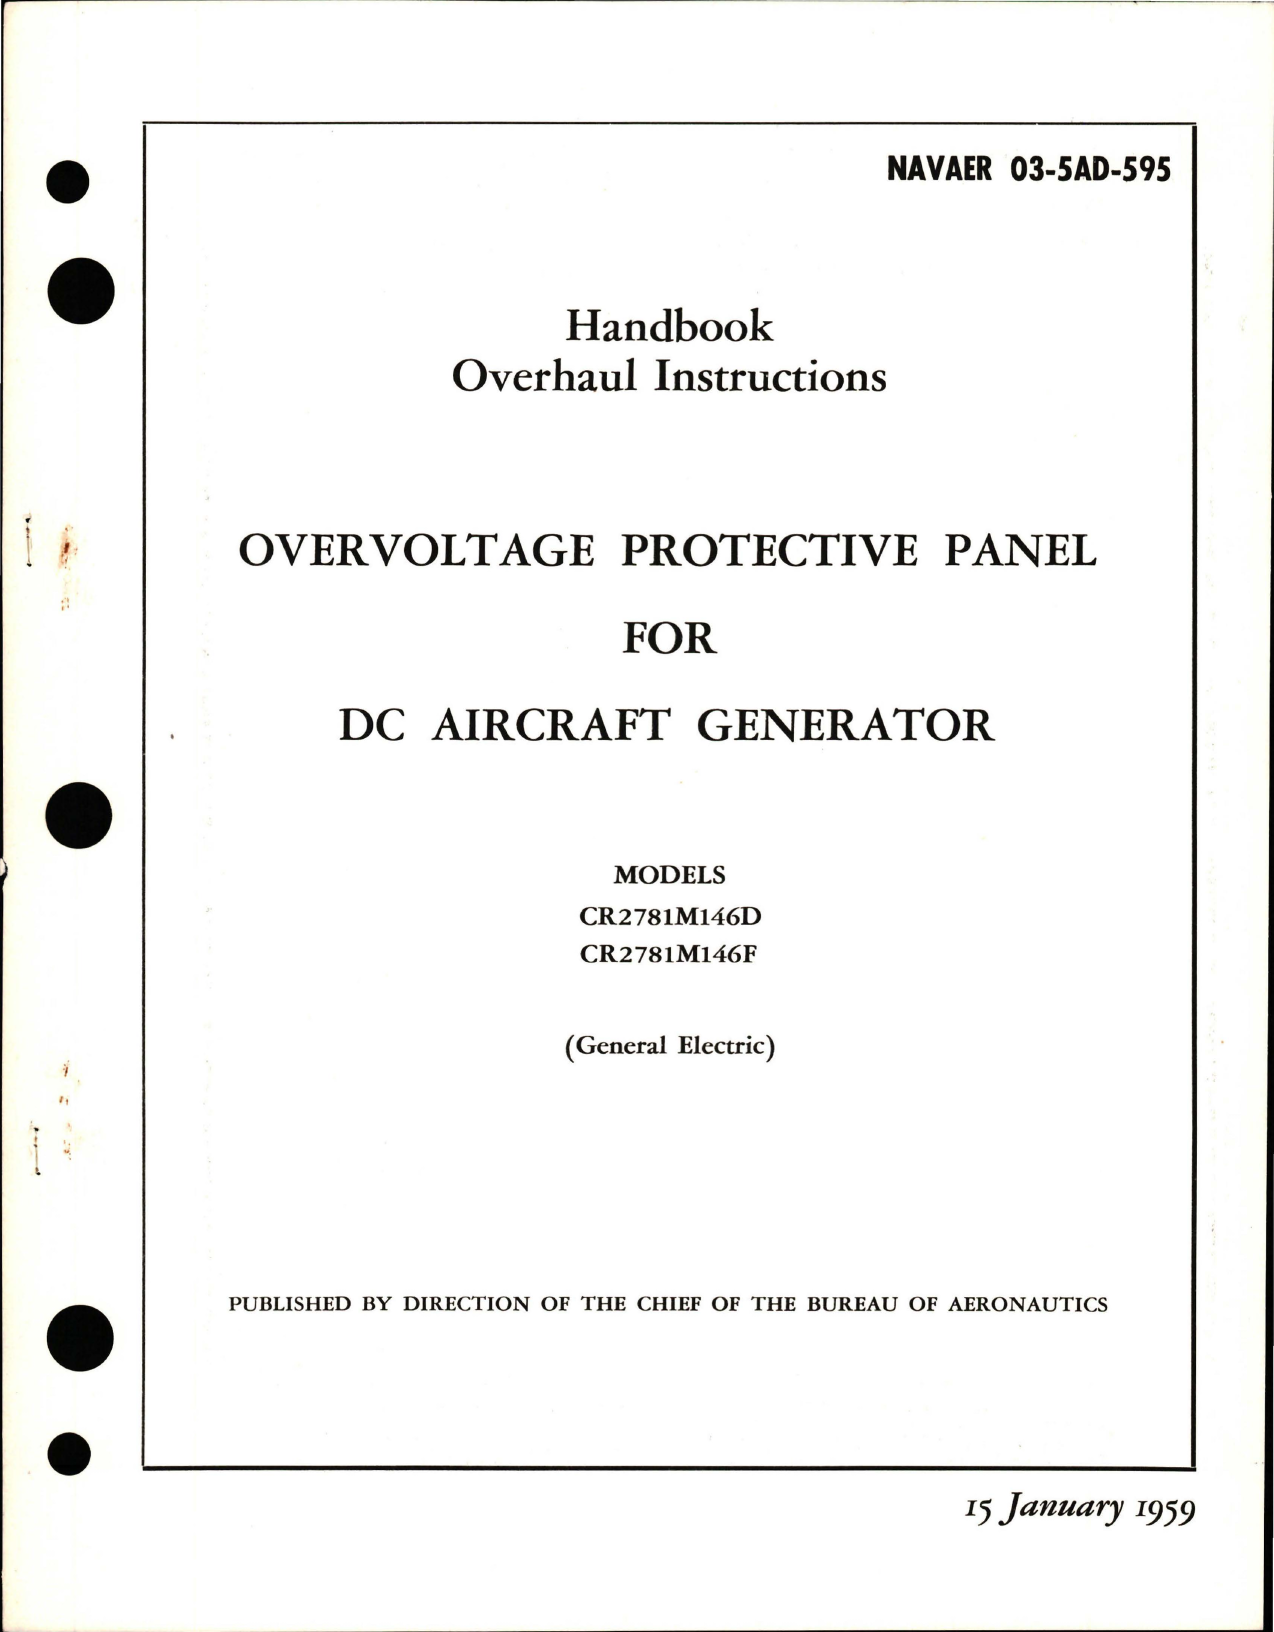 Sample page 1 from AirCorps Library document: Overhaul Instructions for Overvoltage Protective Panel for DC Generator - Models CR2781M146D and CR2781M146F 